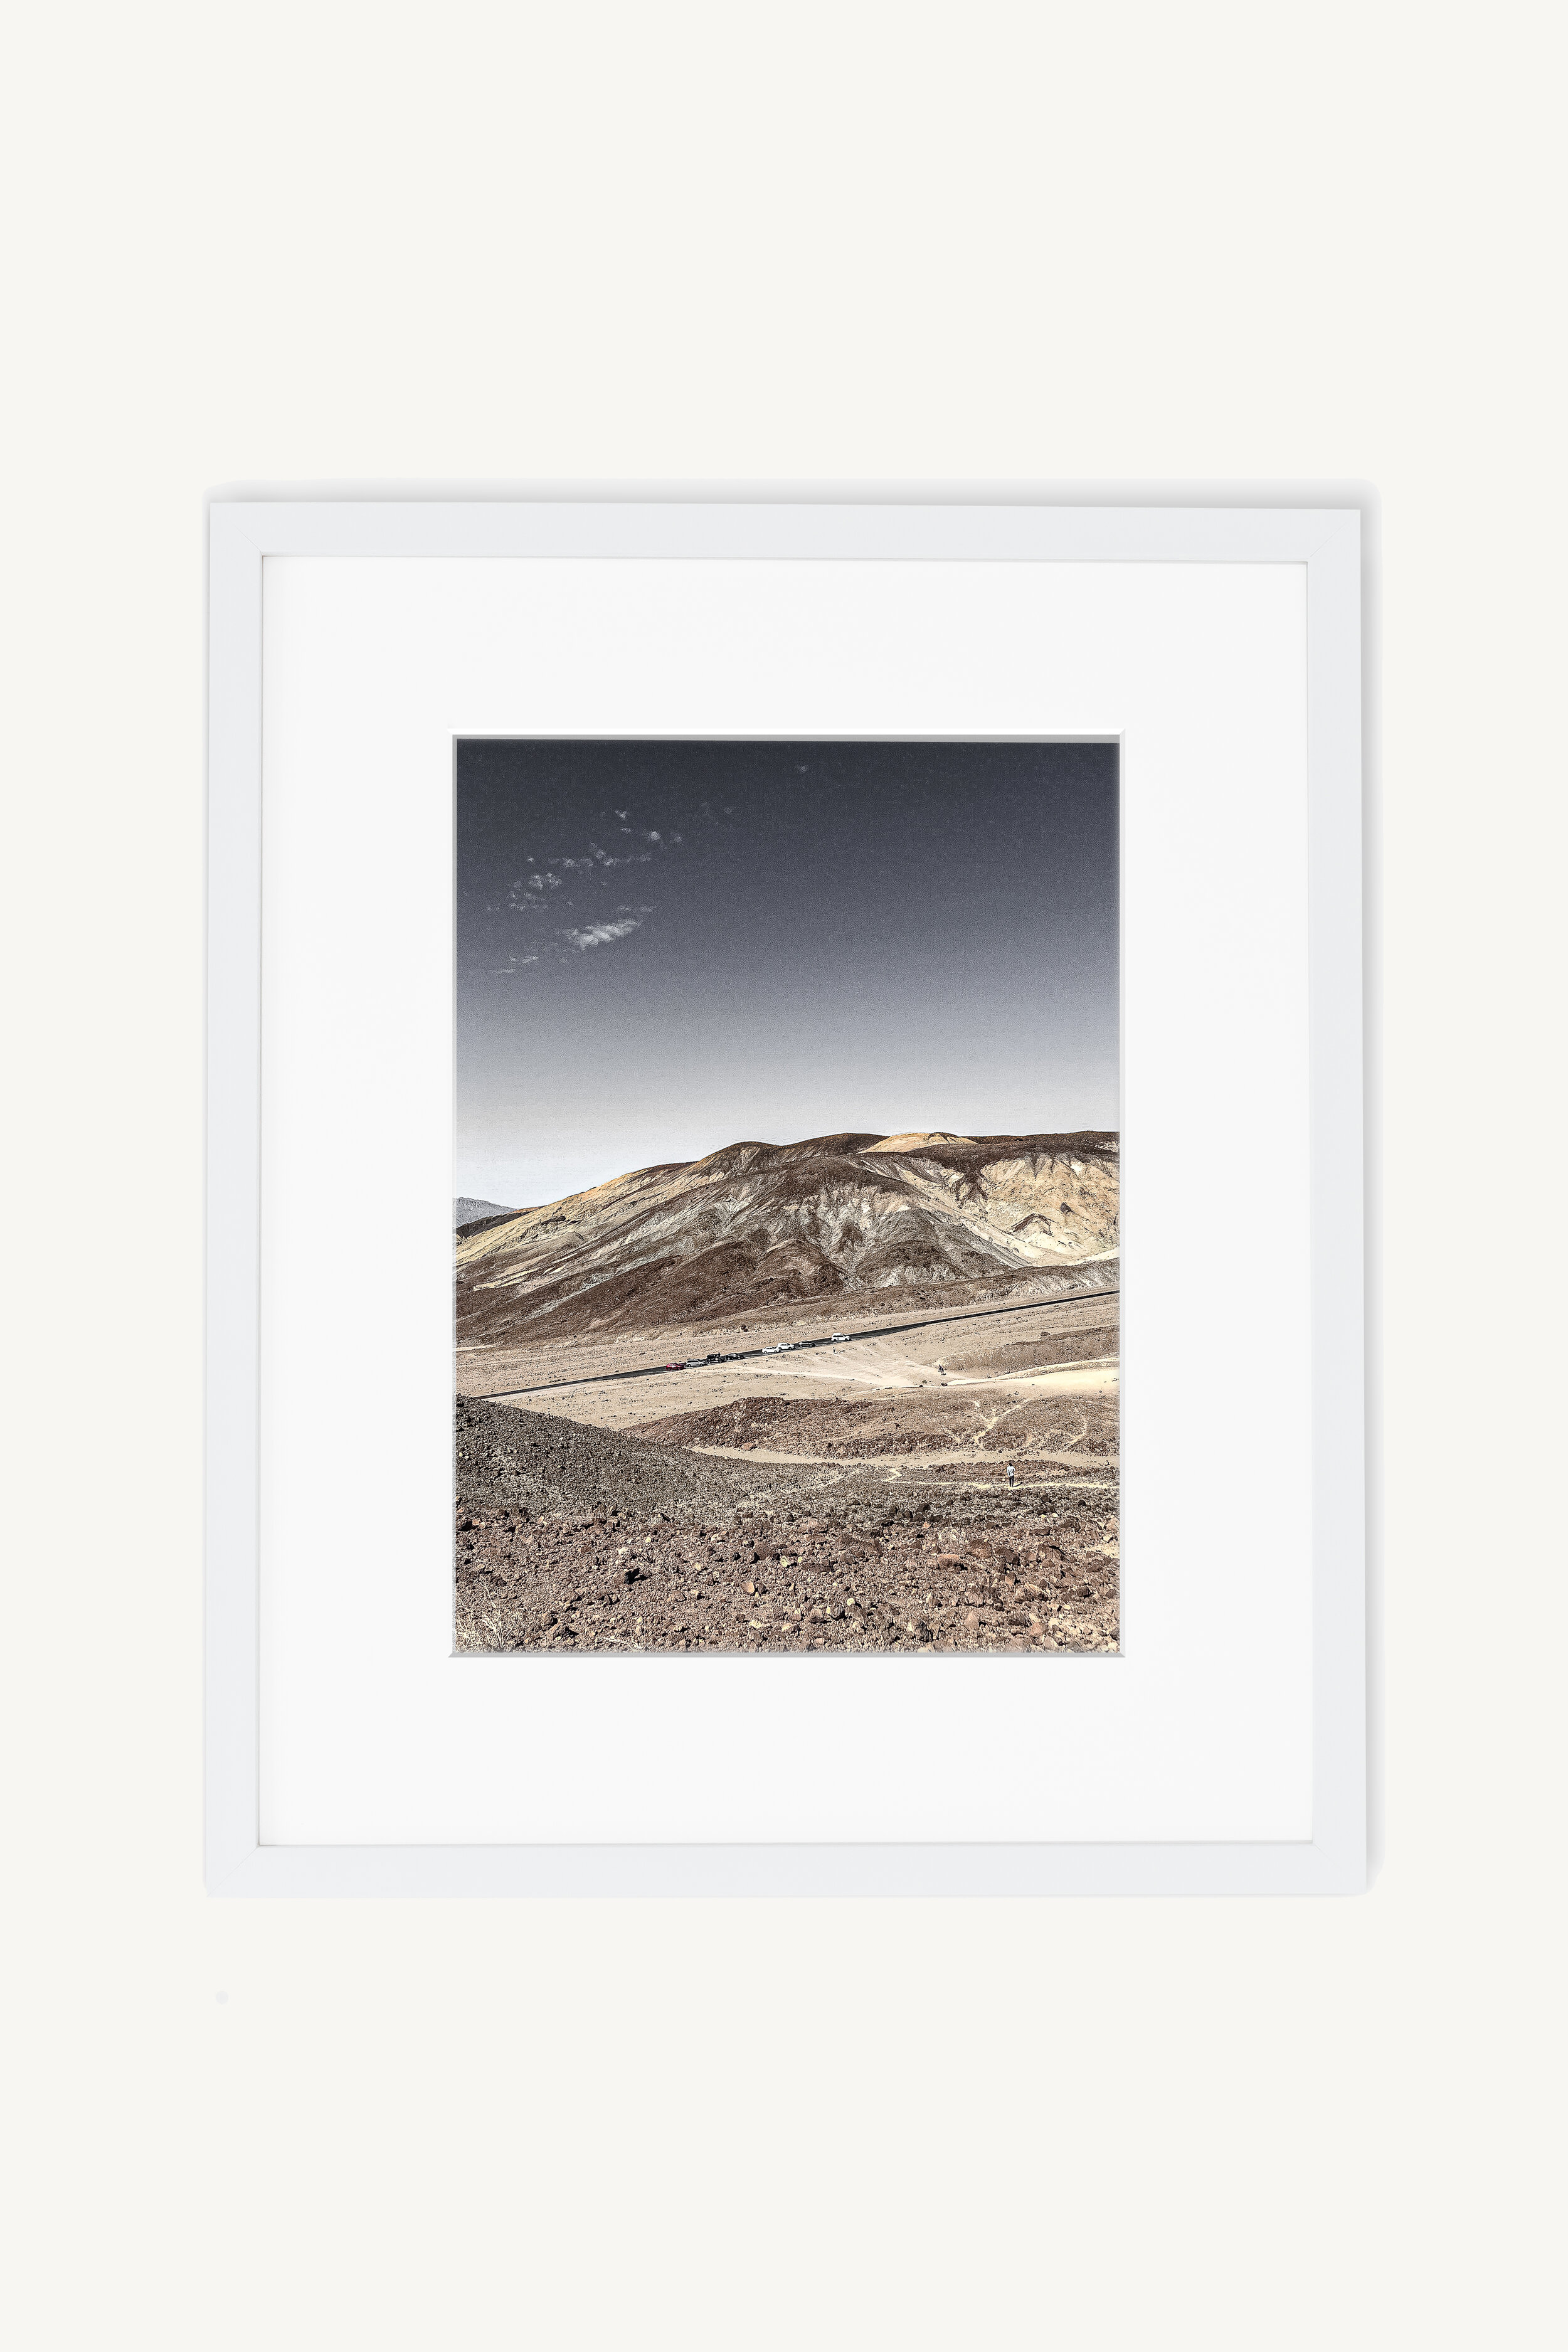 Framed Valley Print PRINTS Prints BADWATER Death | National Badwater — Park